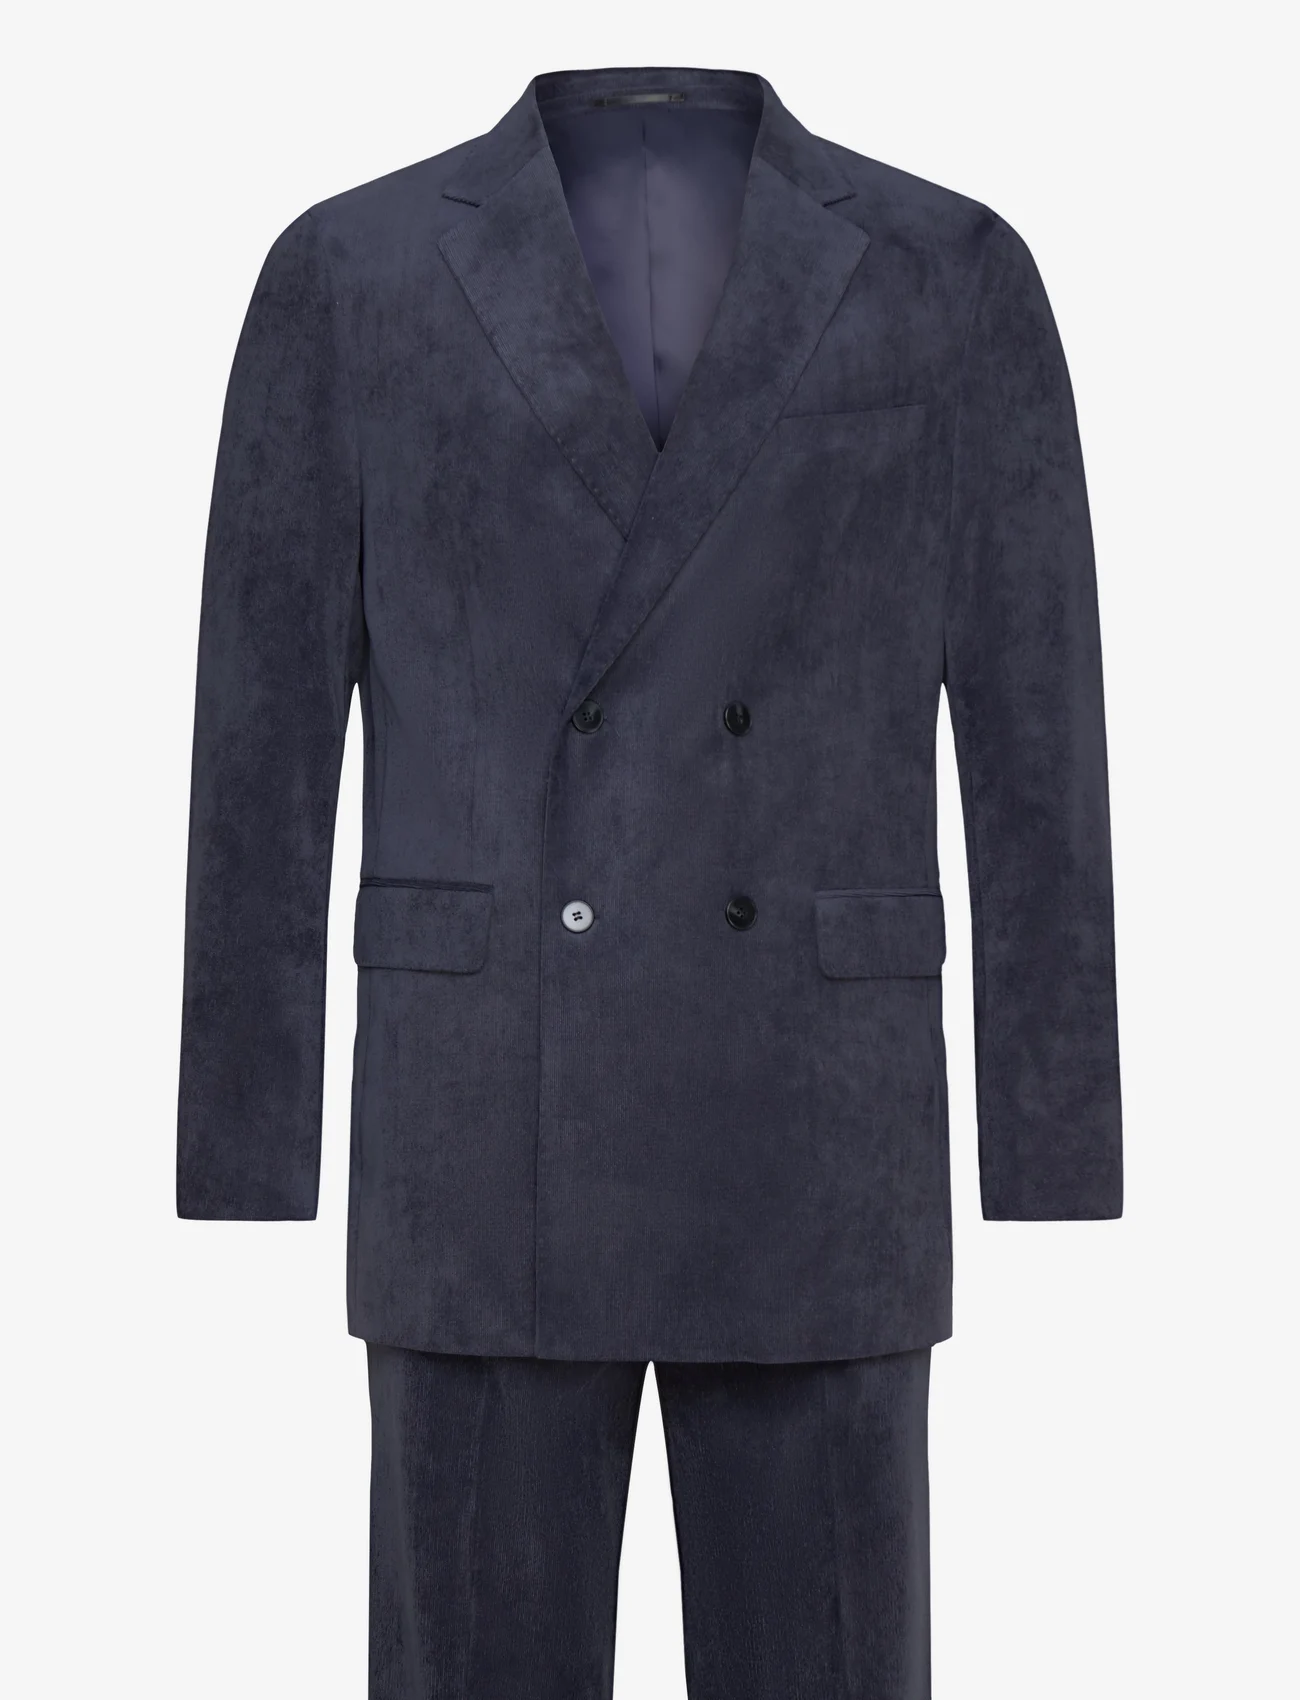 Lindbergh - Fine corduroy superflex DBsuit - double breasted suits - navy - 0